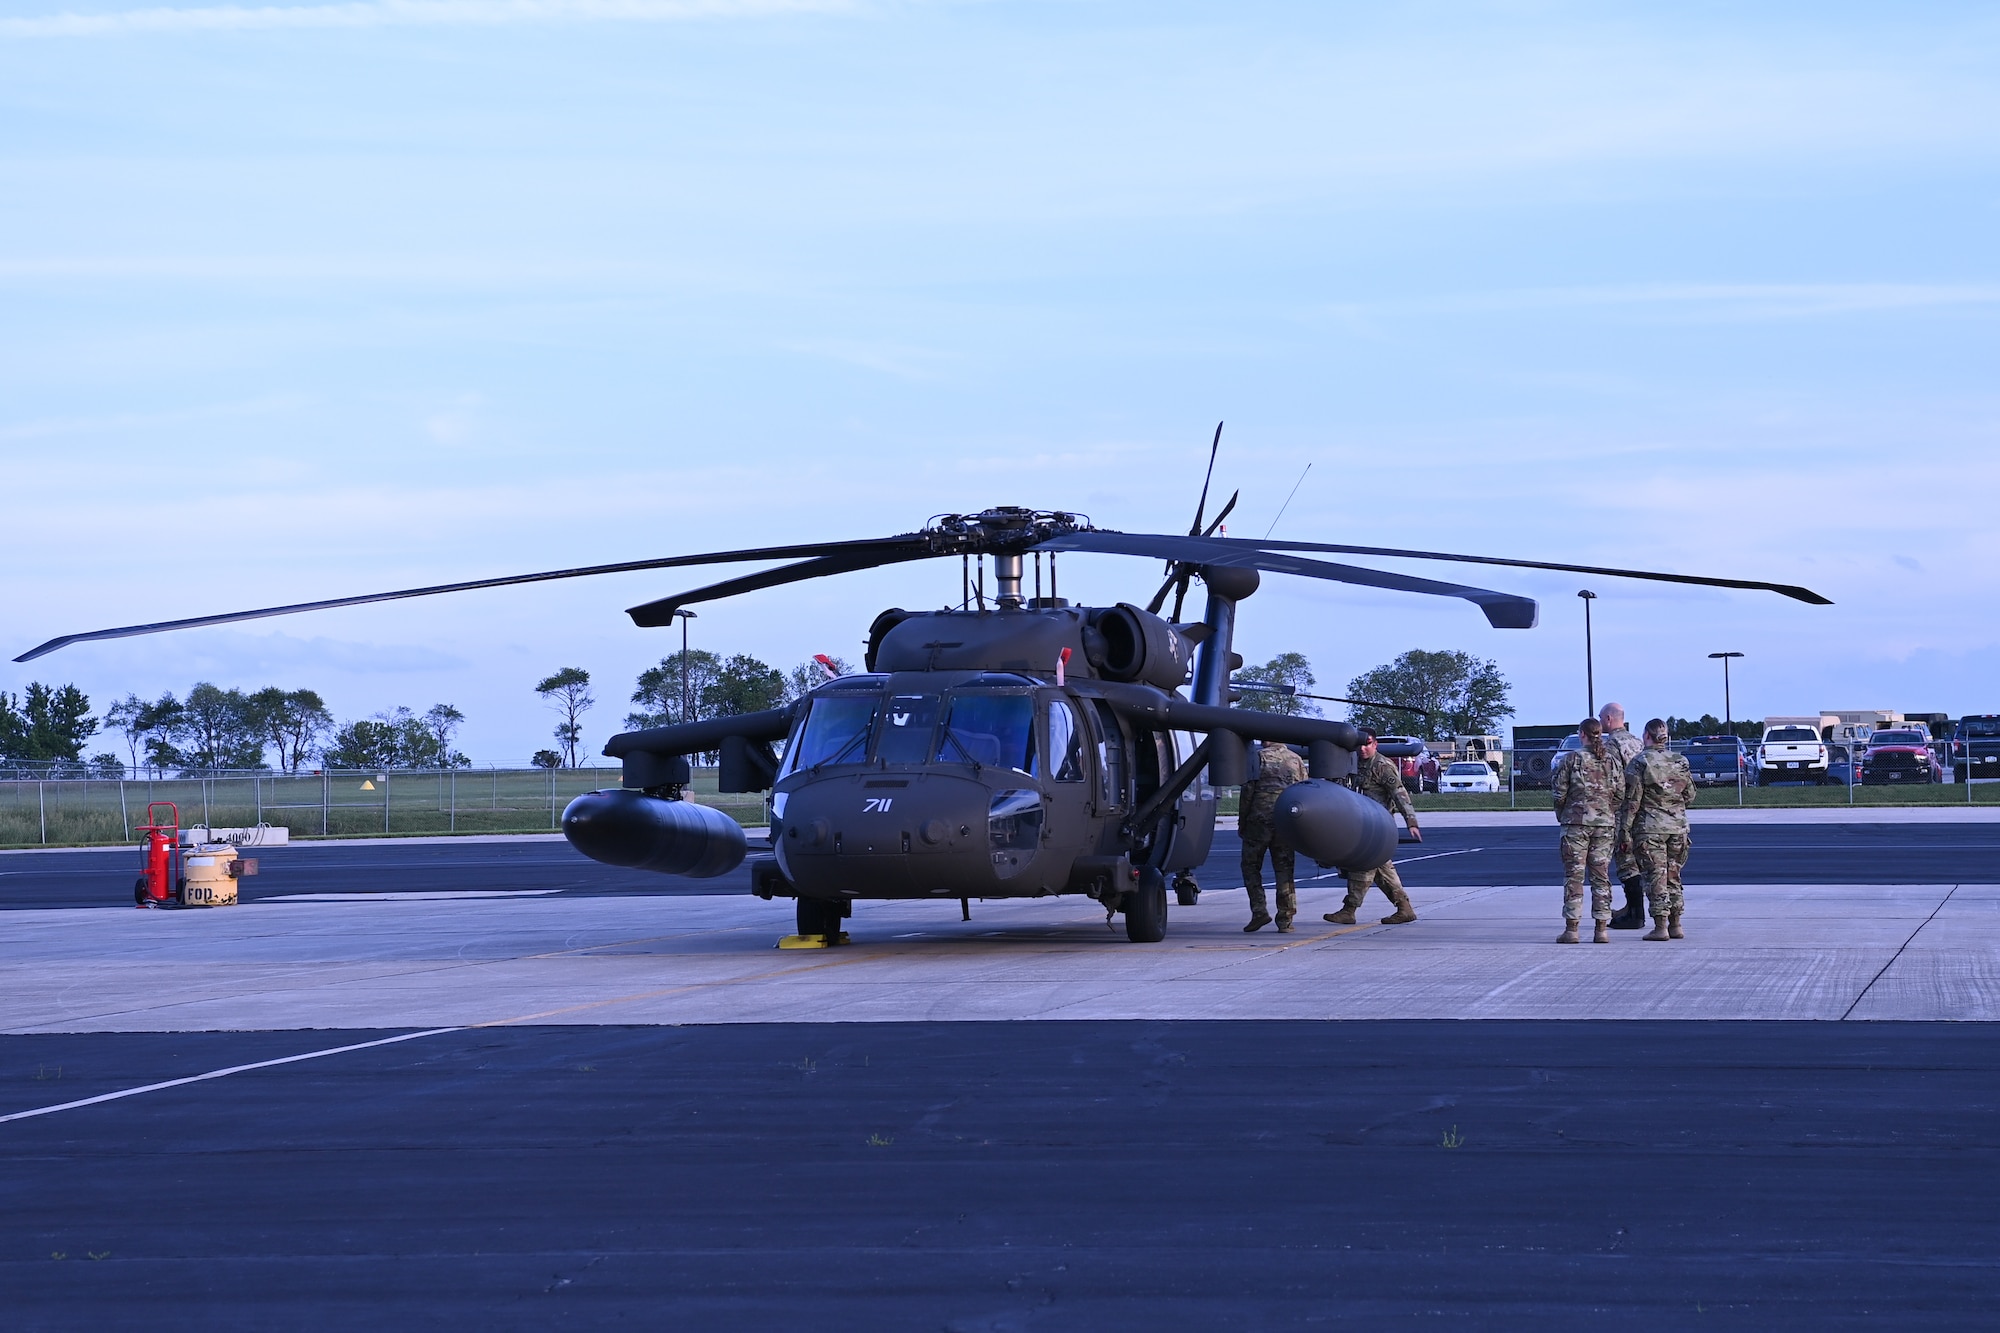 Airmen from the 132d Wing Operations Support Squadron participated in a joint exercise with Soldiers from C Co 2-147th Air Assault Helicopter Battalion in Boone, Iowa, June 10, 2022. Intelligence operations specialists from the 132d Wing shared intel to support the various mission sets.